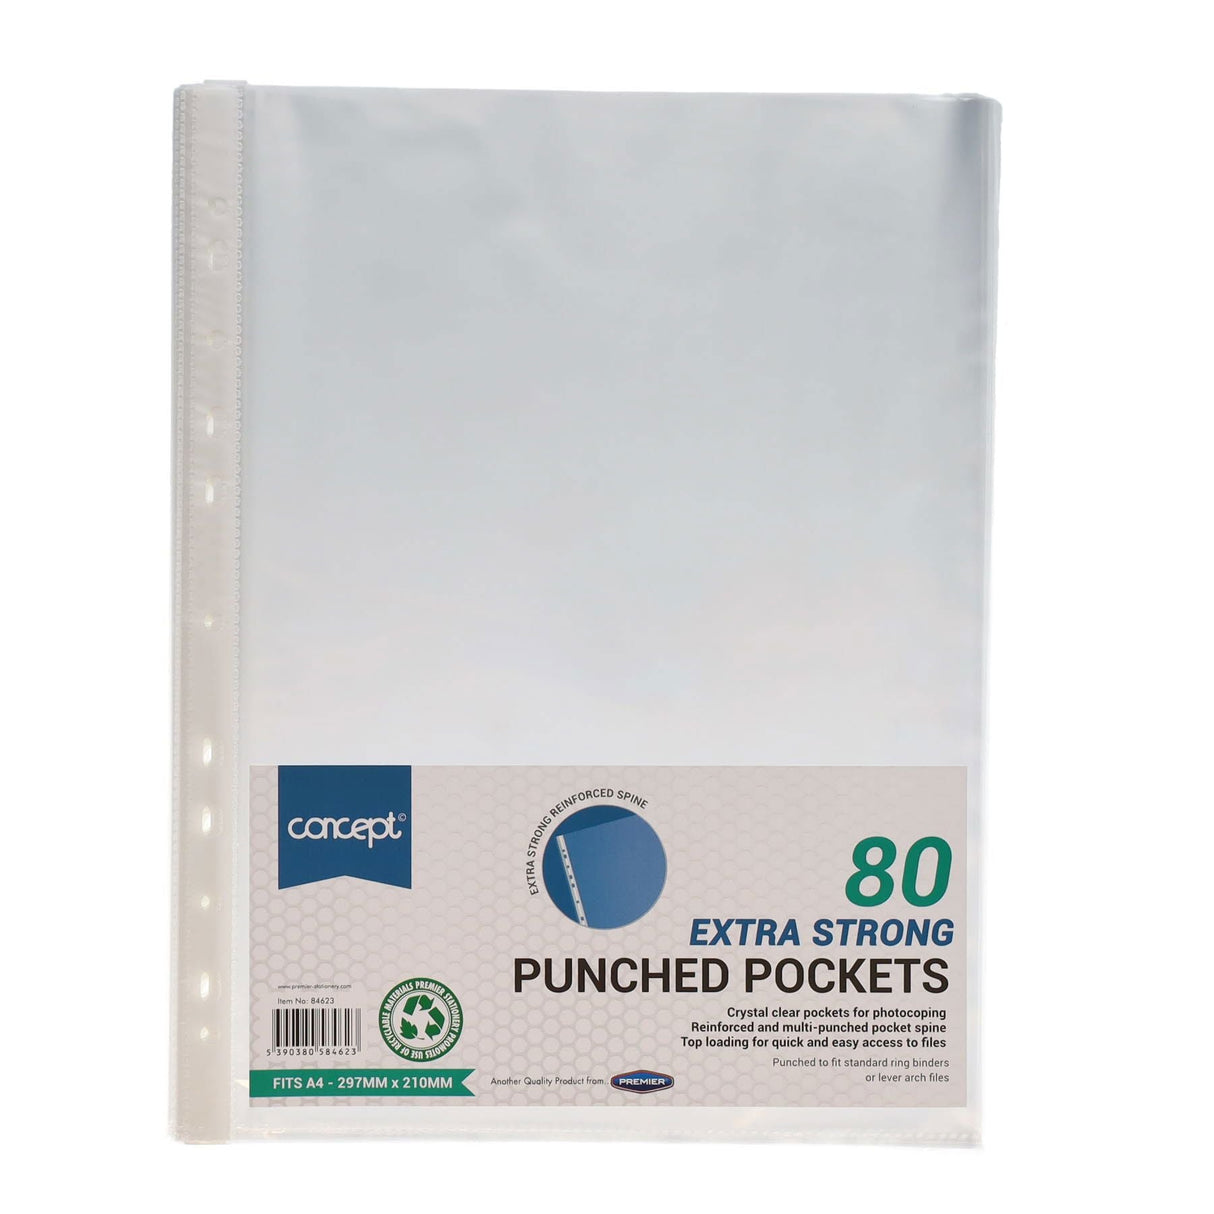 Premier Office A4 Protective Punched Pockets - Pack of 80-Punched Pockets-Premier Office|StationeryShop.co.uk